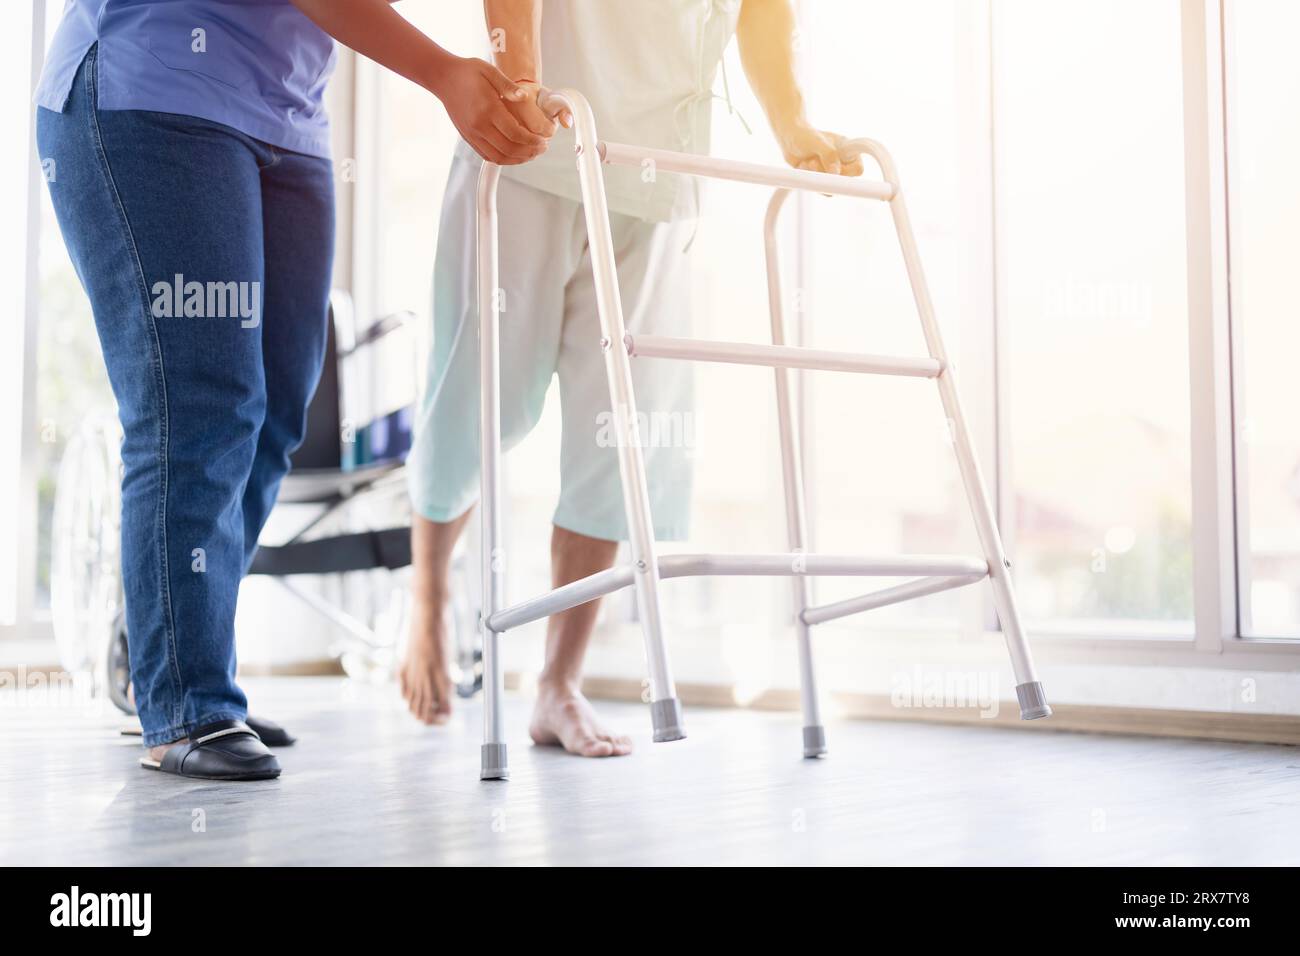 Patient muscle recovery walking training practice using walker with physiotherapist care help support Stock Photo